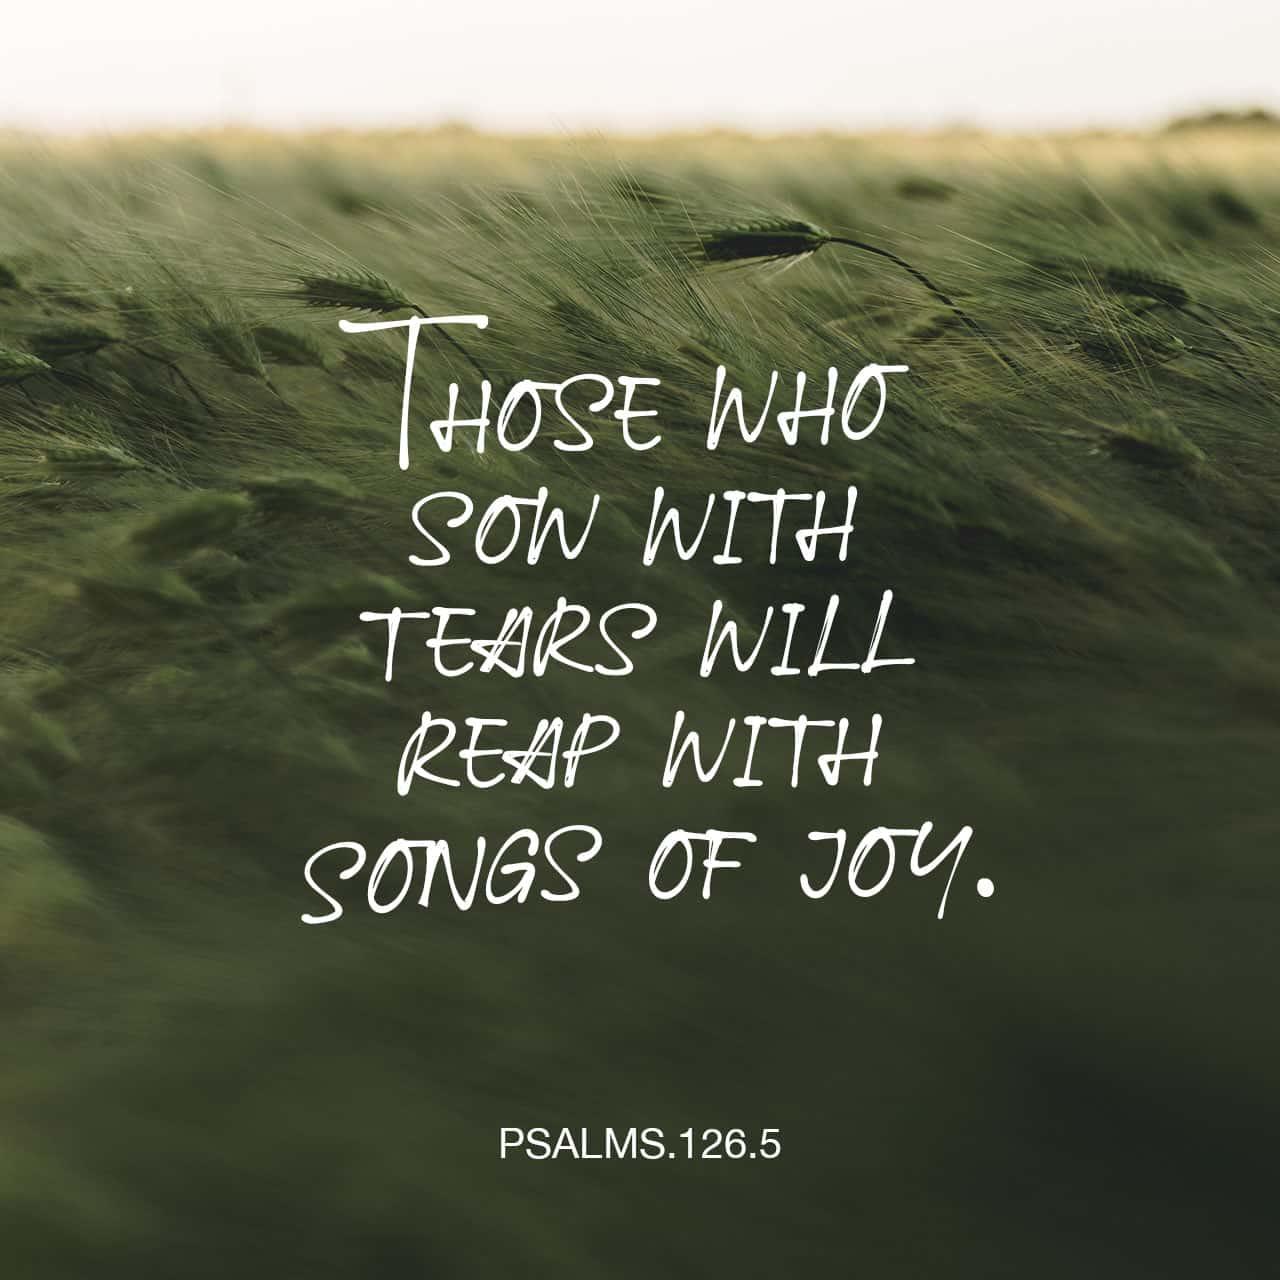 Bible Verse of the Day - day 82 - image 67193 (Psalms 126:1-6)